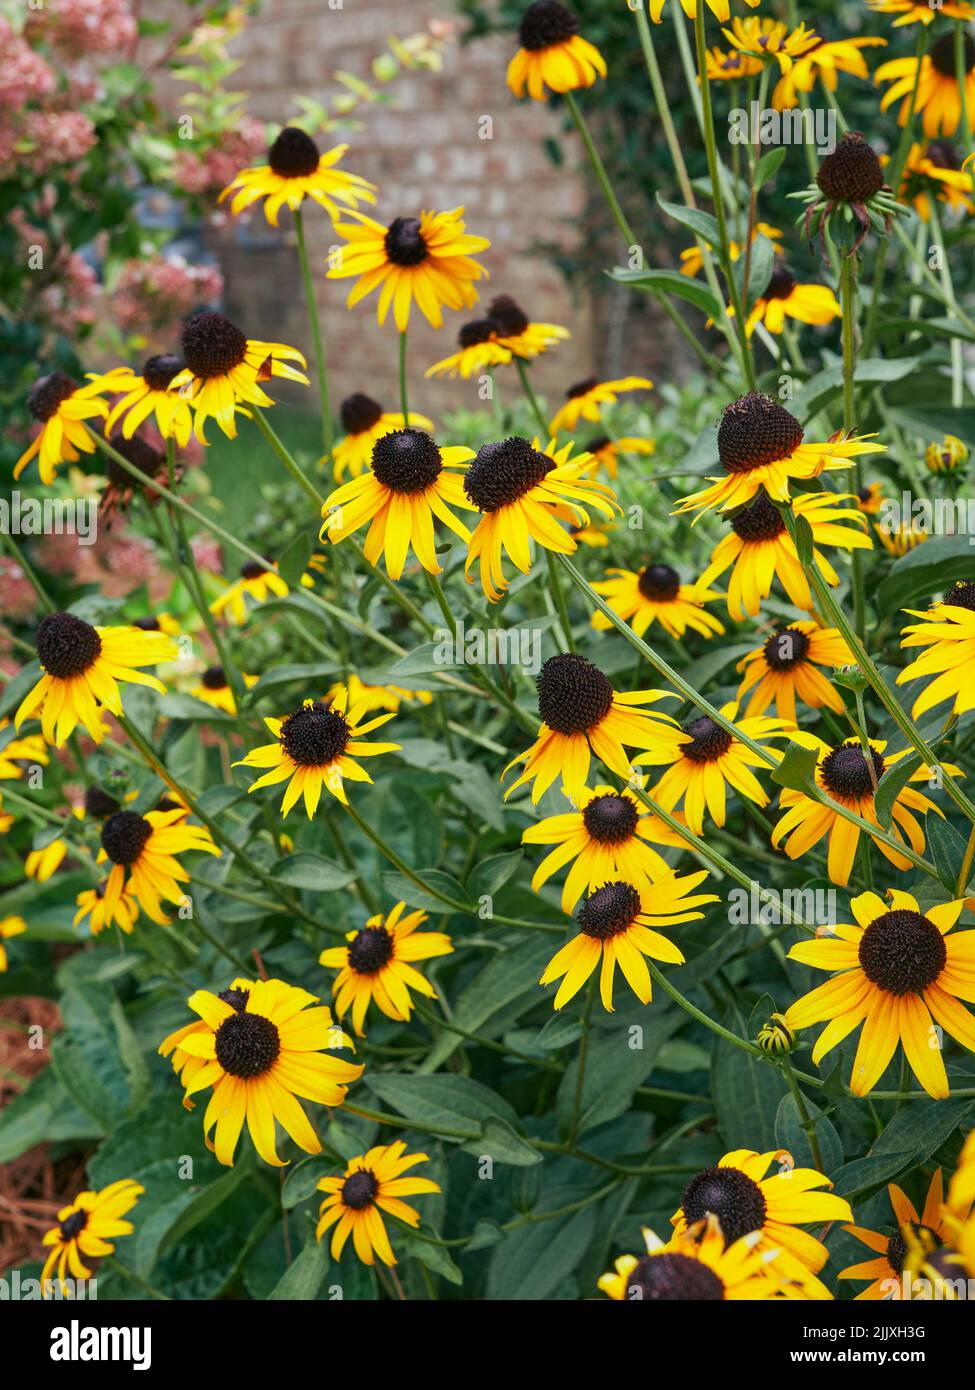 Rudbeckia hirta, Black Eyed Susans, in a garden setting. The flower is popular with southern USA gardeners. Stock Photo